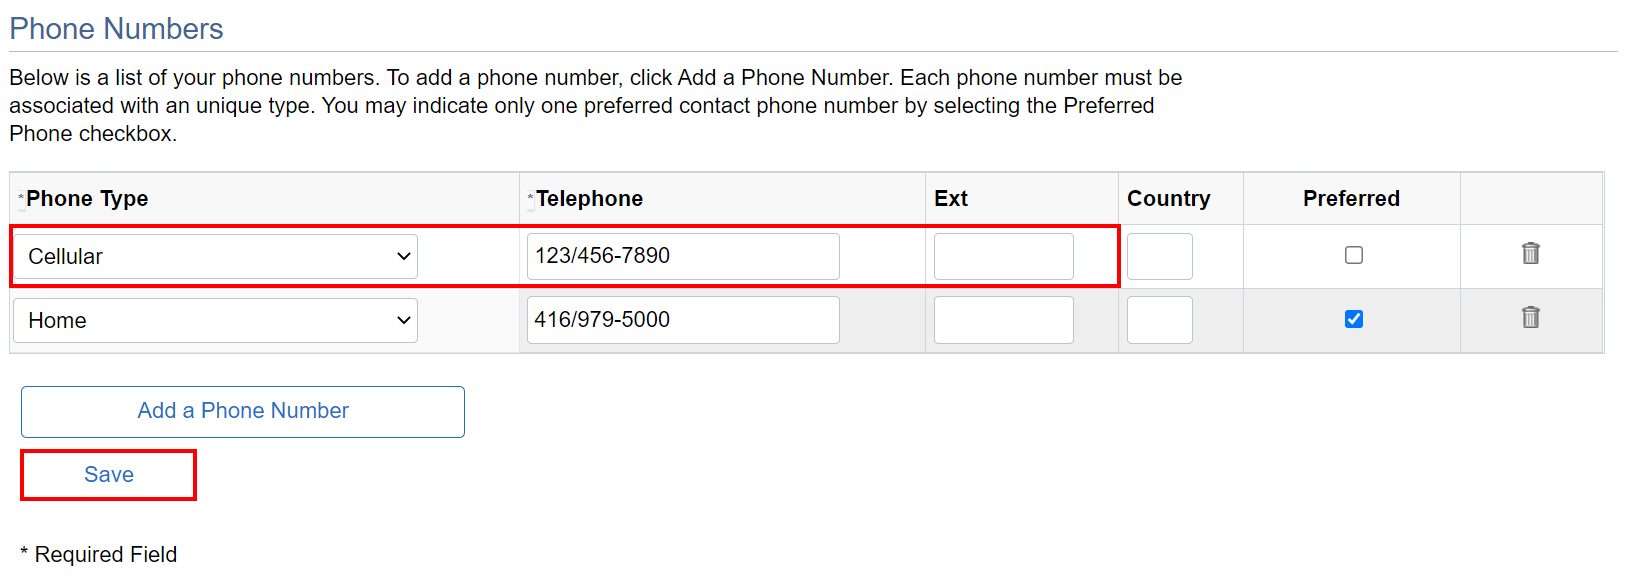 List of user's phone numbers, including phone type, number, extension and preference